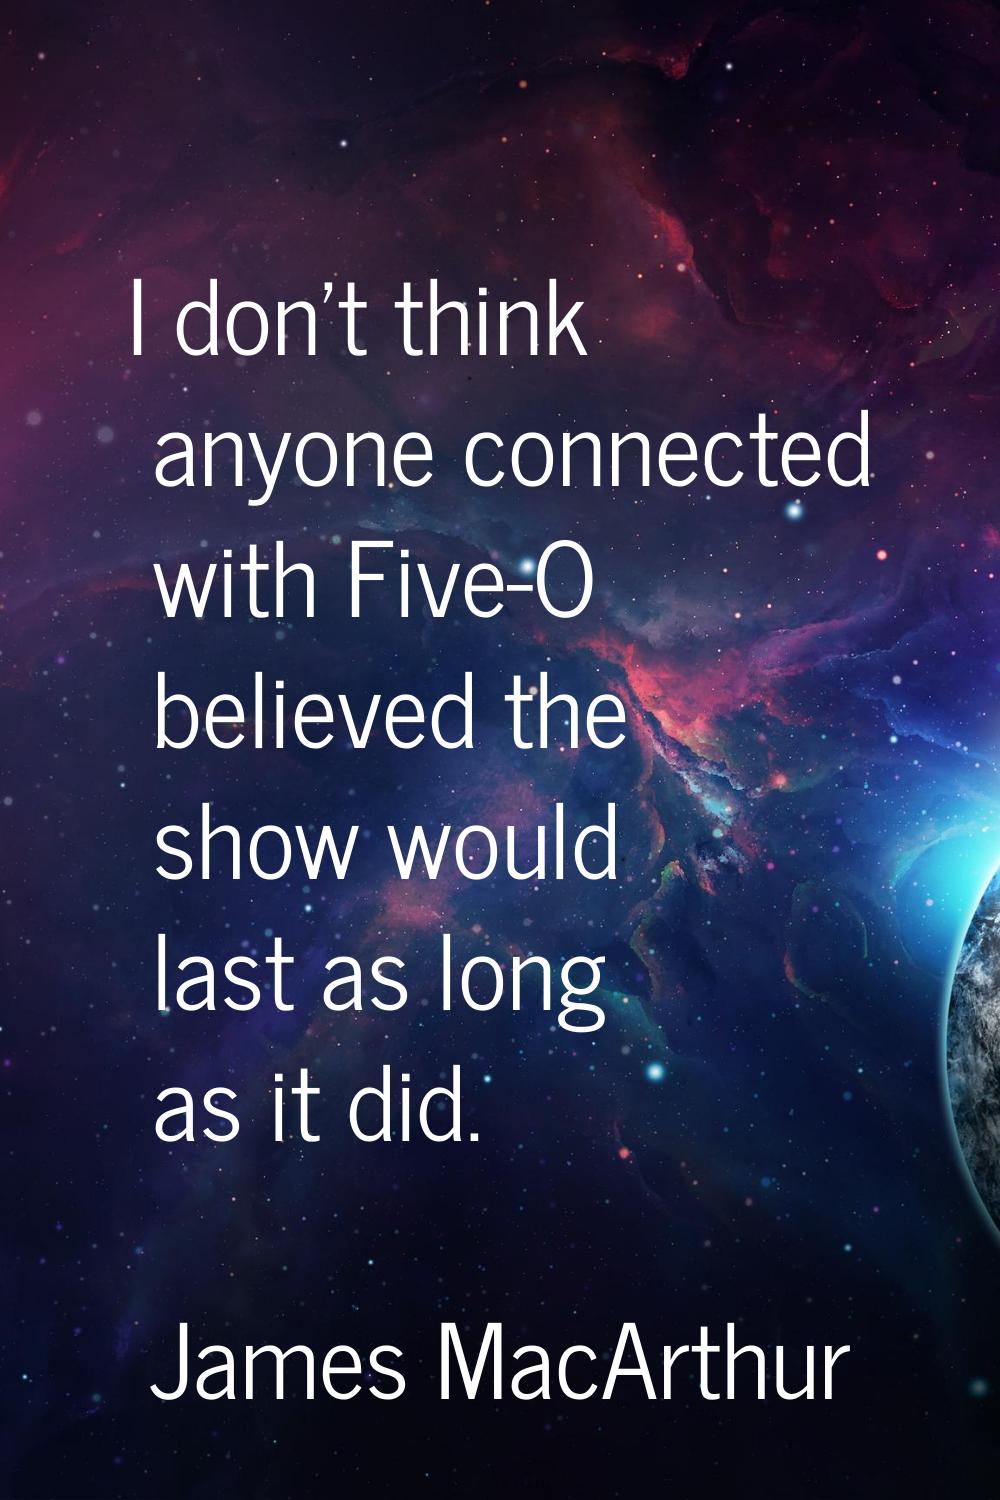 I don't think anyone connected with Five-O believed the show would last as long as it did.